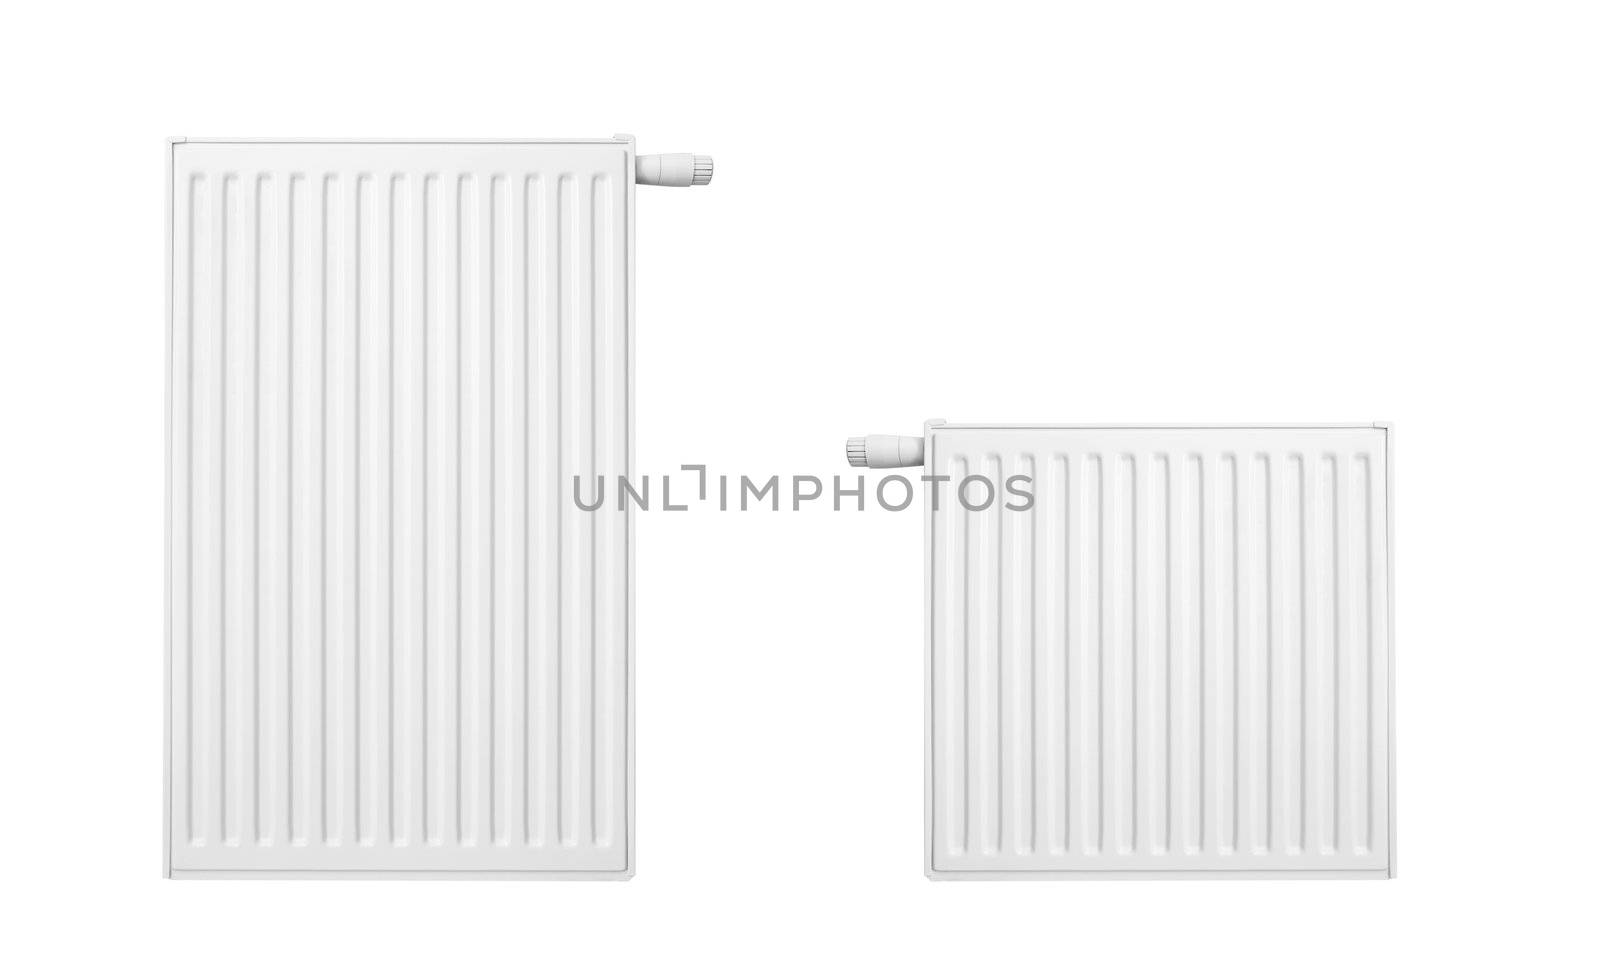 Radiator set isolated over a white background  by simpson33